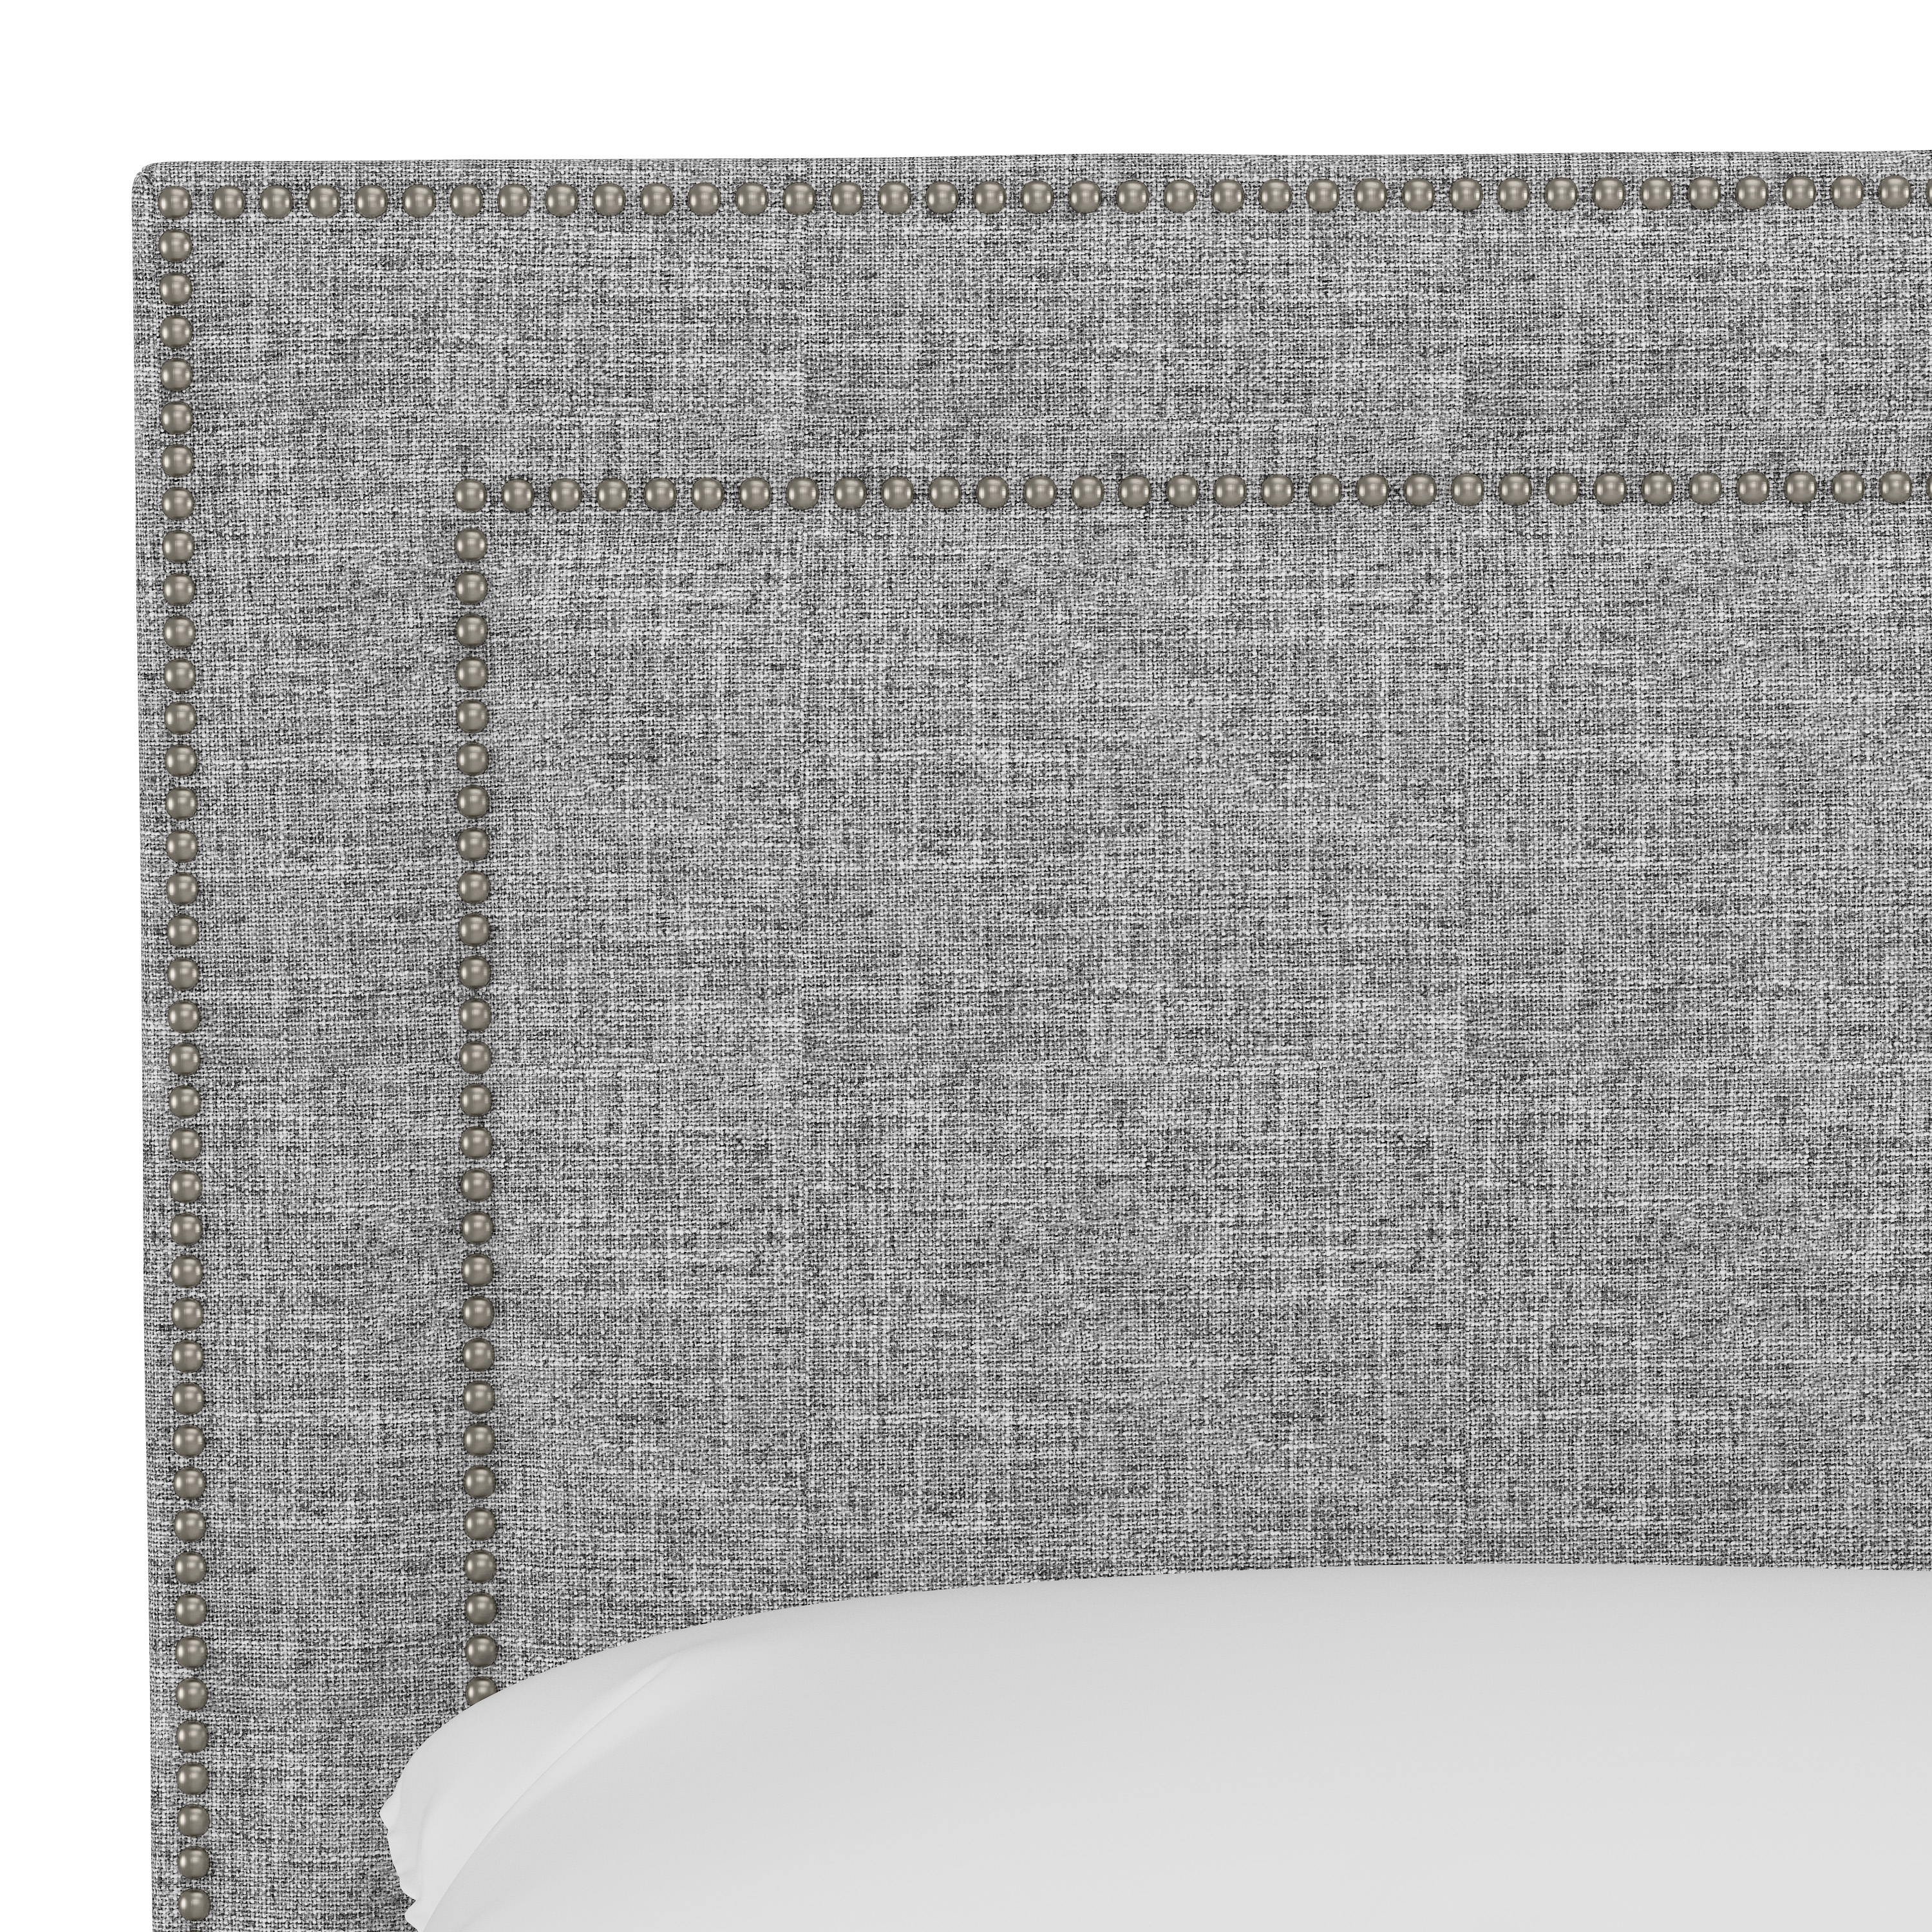 Williams Bed, Full, Pumice, Pewter Nailheads - Image 3